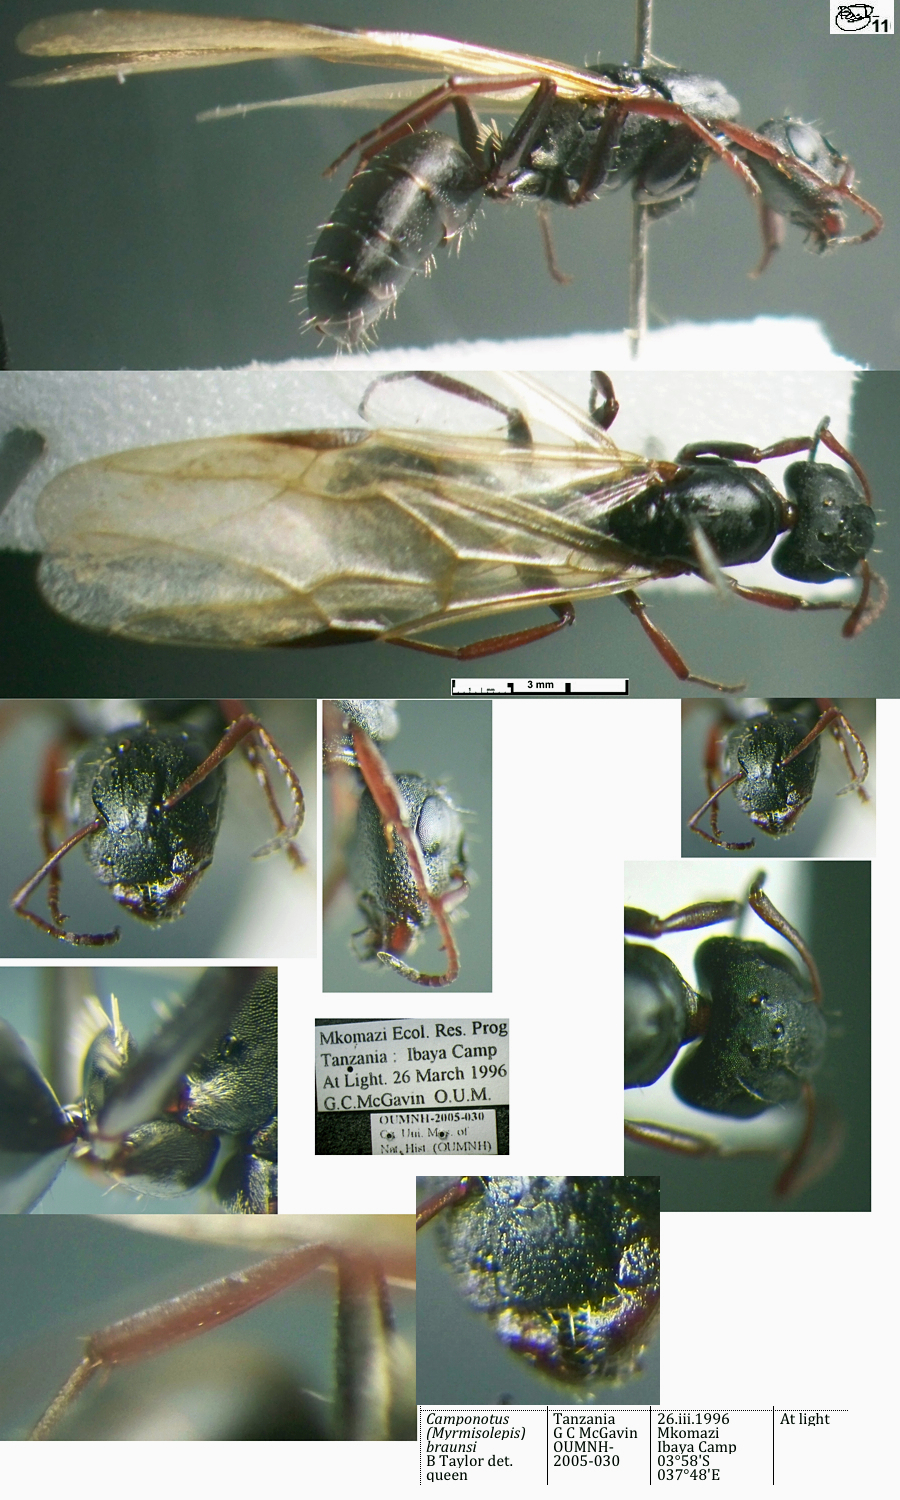 {Camponotus braunsi queen}